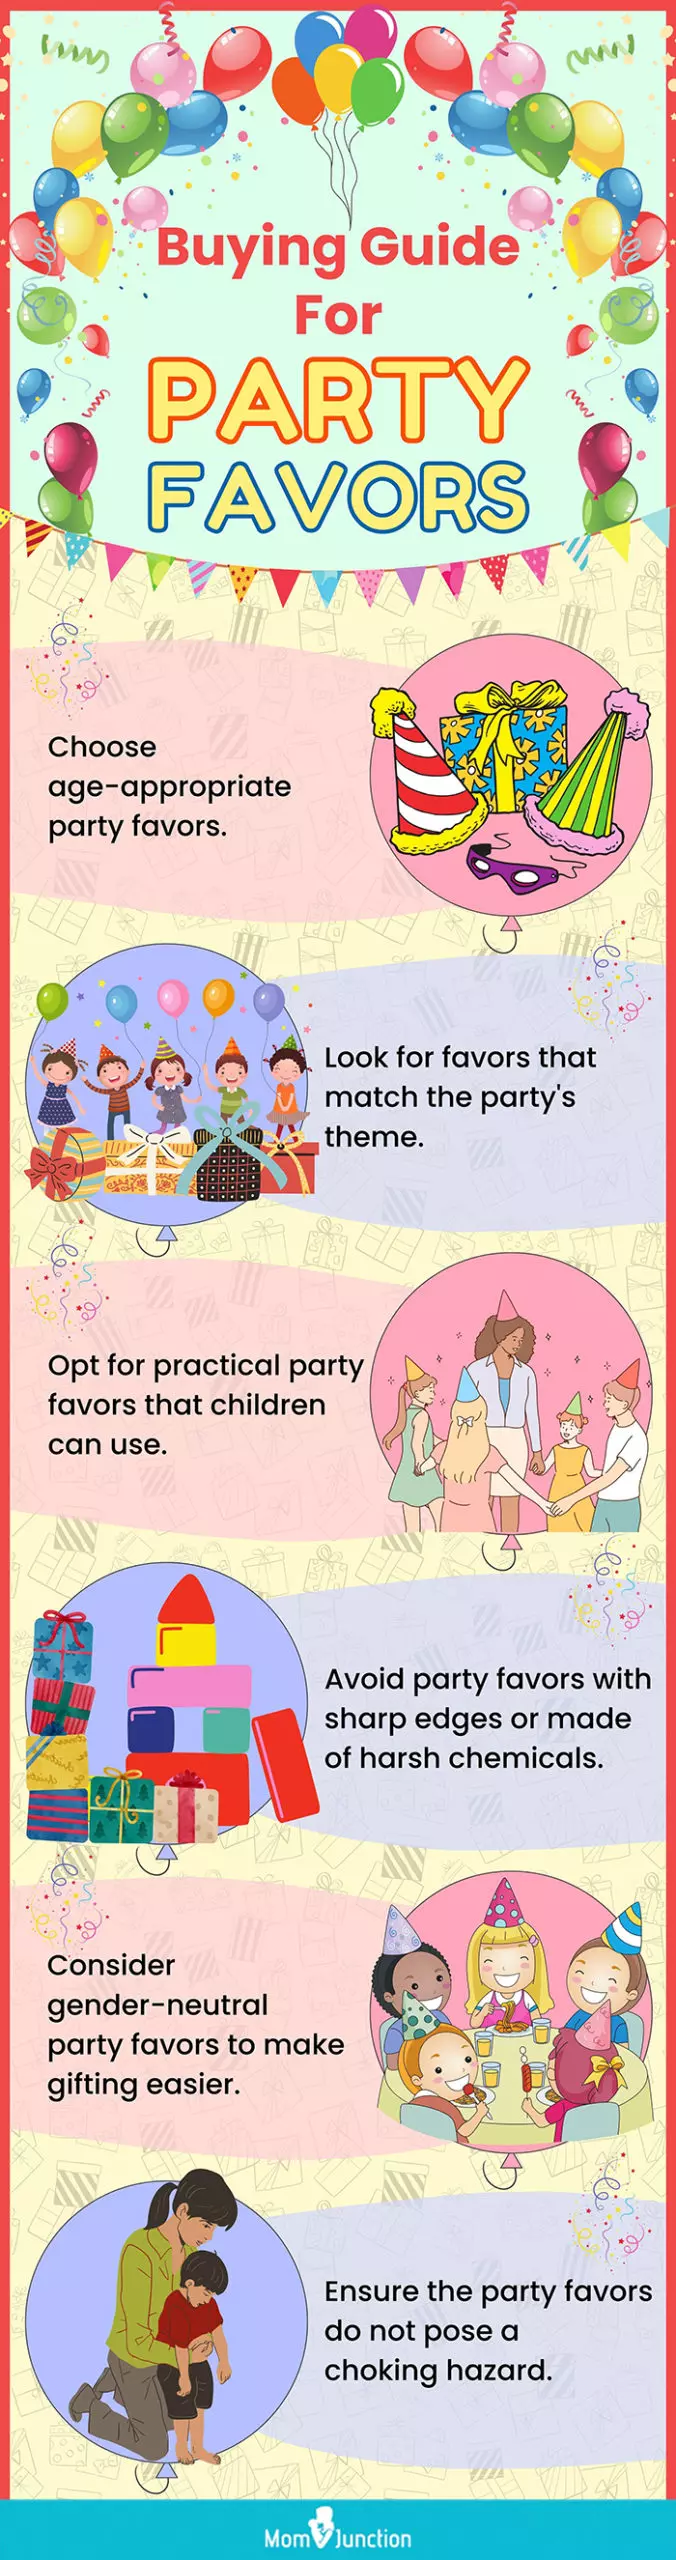 Buying Guide For Party Favors